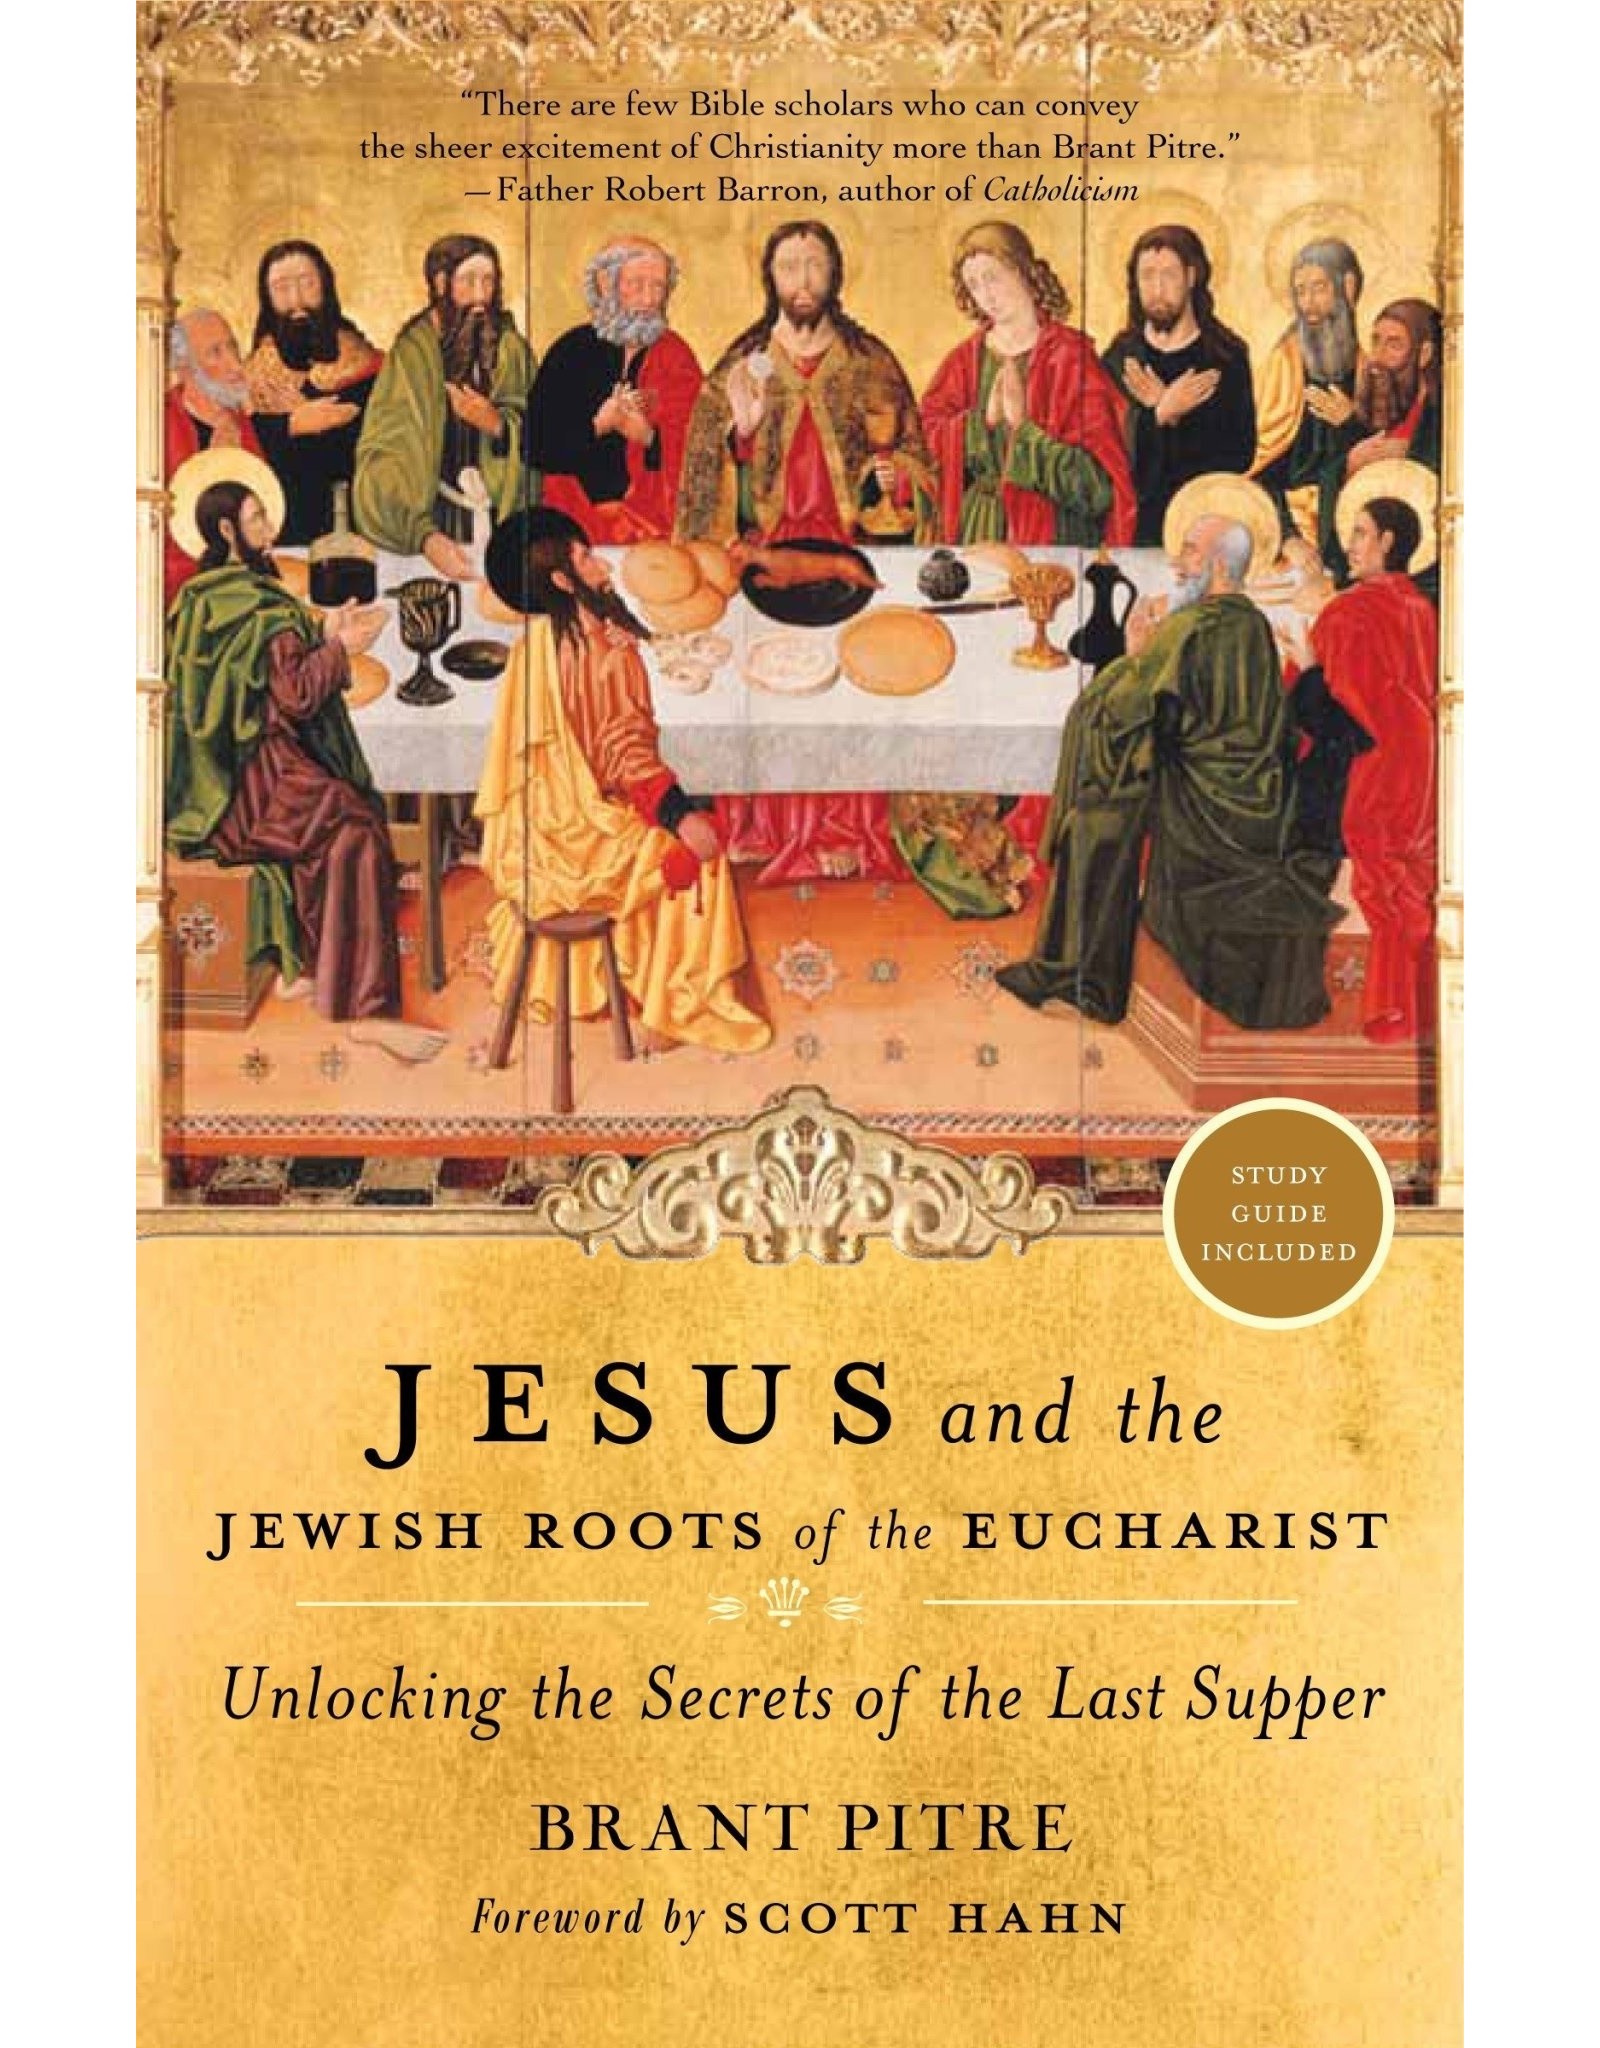 Image Jesus & the Jewish Roots of the Eucharist: Unlocking the Secrets of the Last Supper